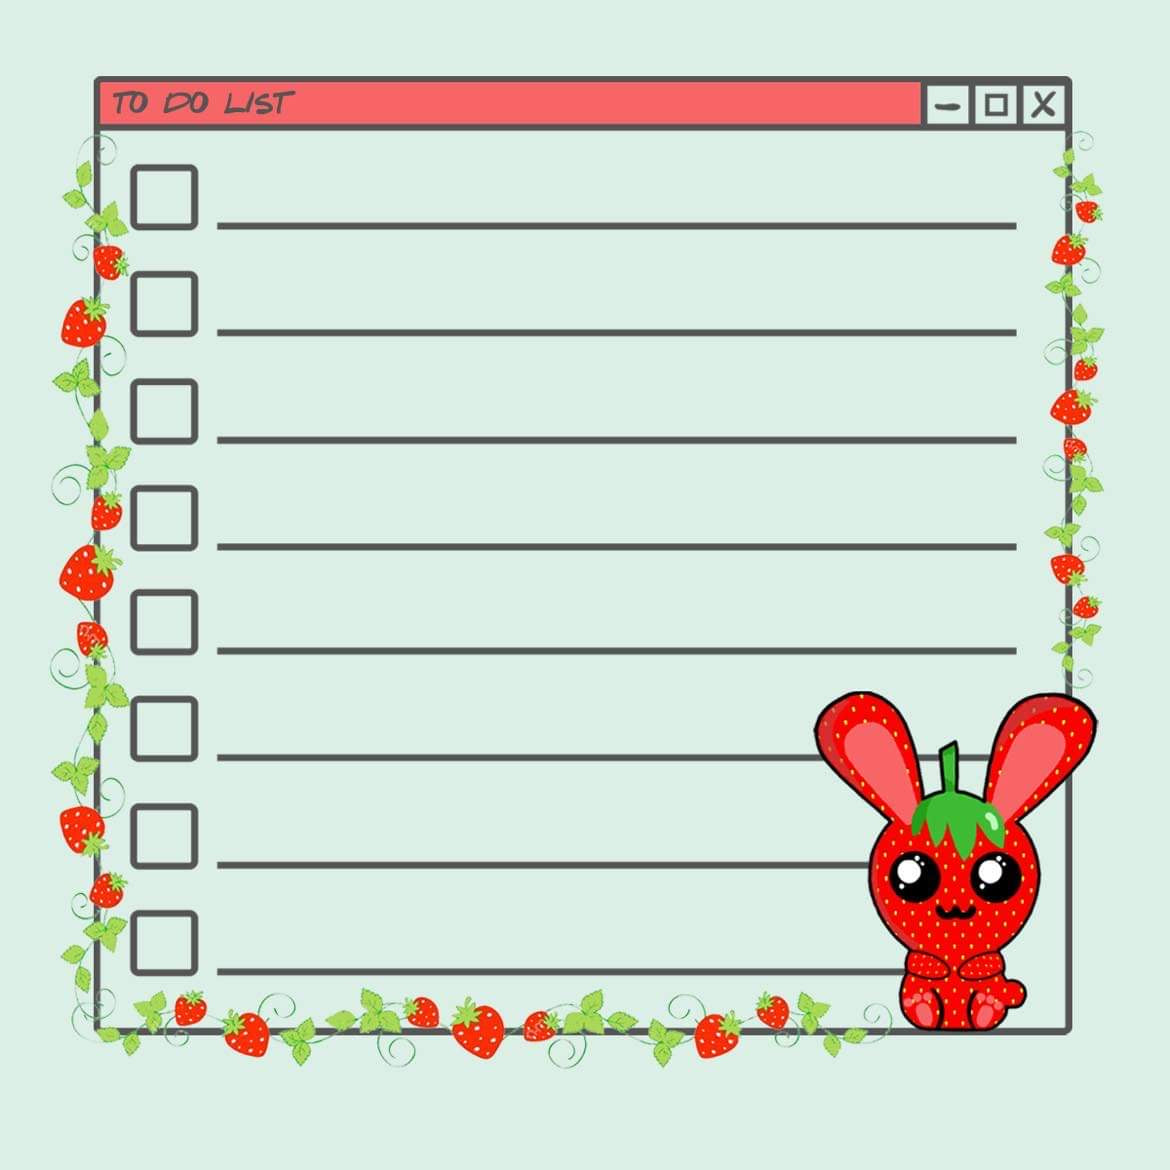 post it note - strawberry bunny post it notes, strawberry, bunny, kawaii, kawaii stationary, stationary, memo pad, custom, cute fruit, ironic, sticky note, stickynote, postit note, custom post it notes, post it brand, designed by me